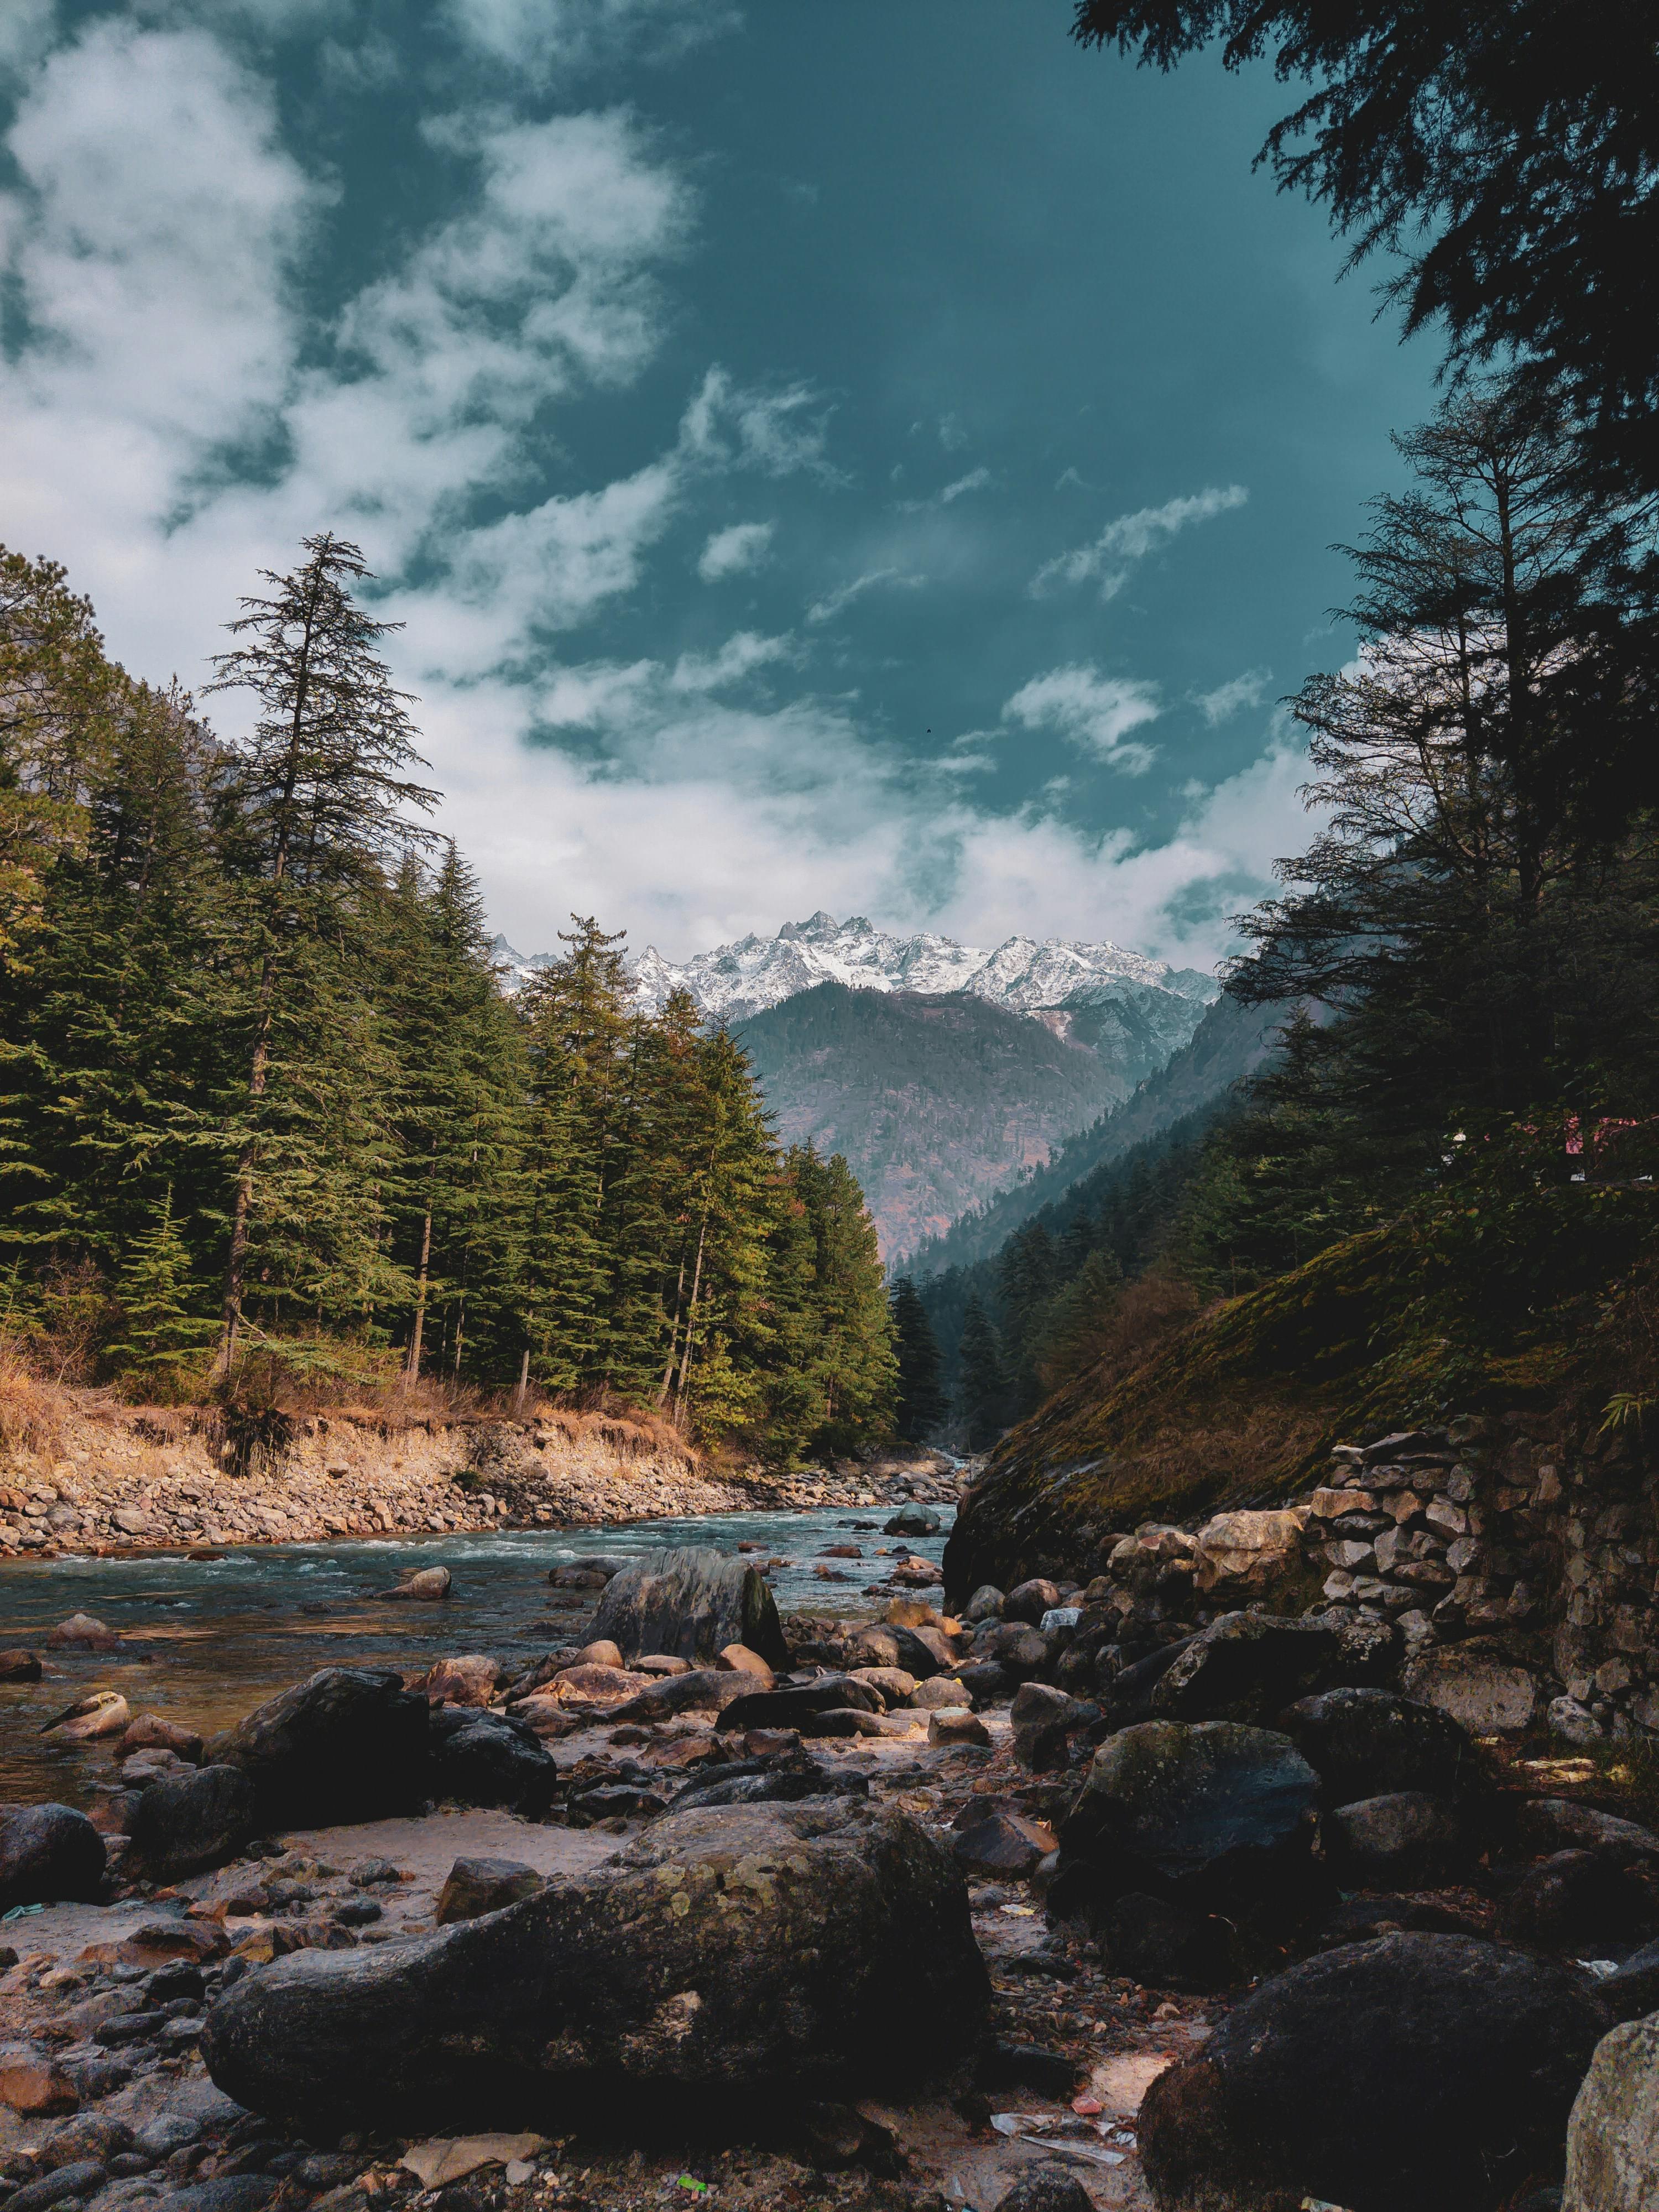 Kasol Trip with Trek to Kheerganga and Tosh Valley from Delhi